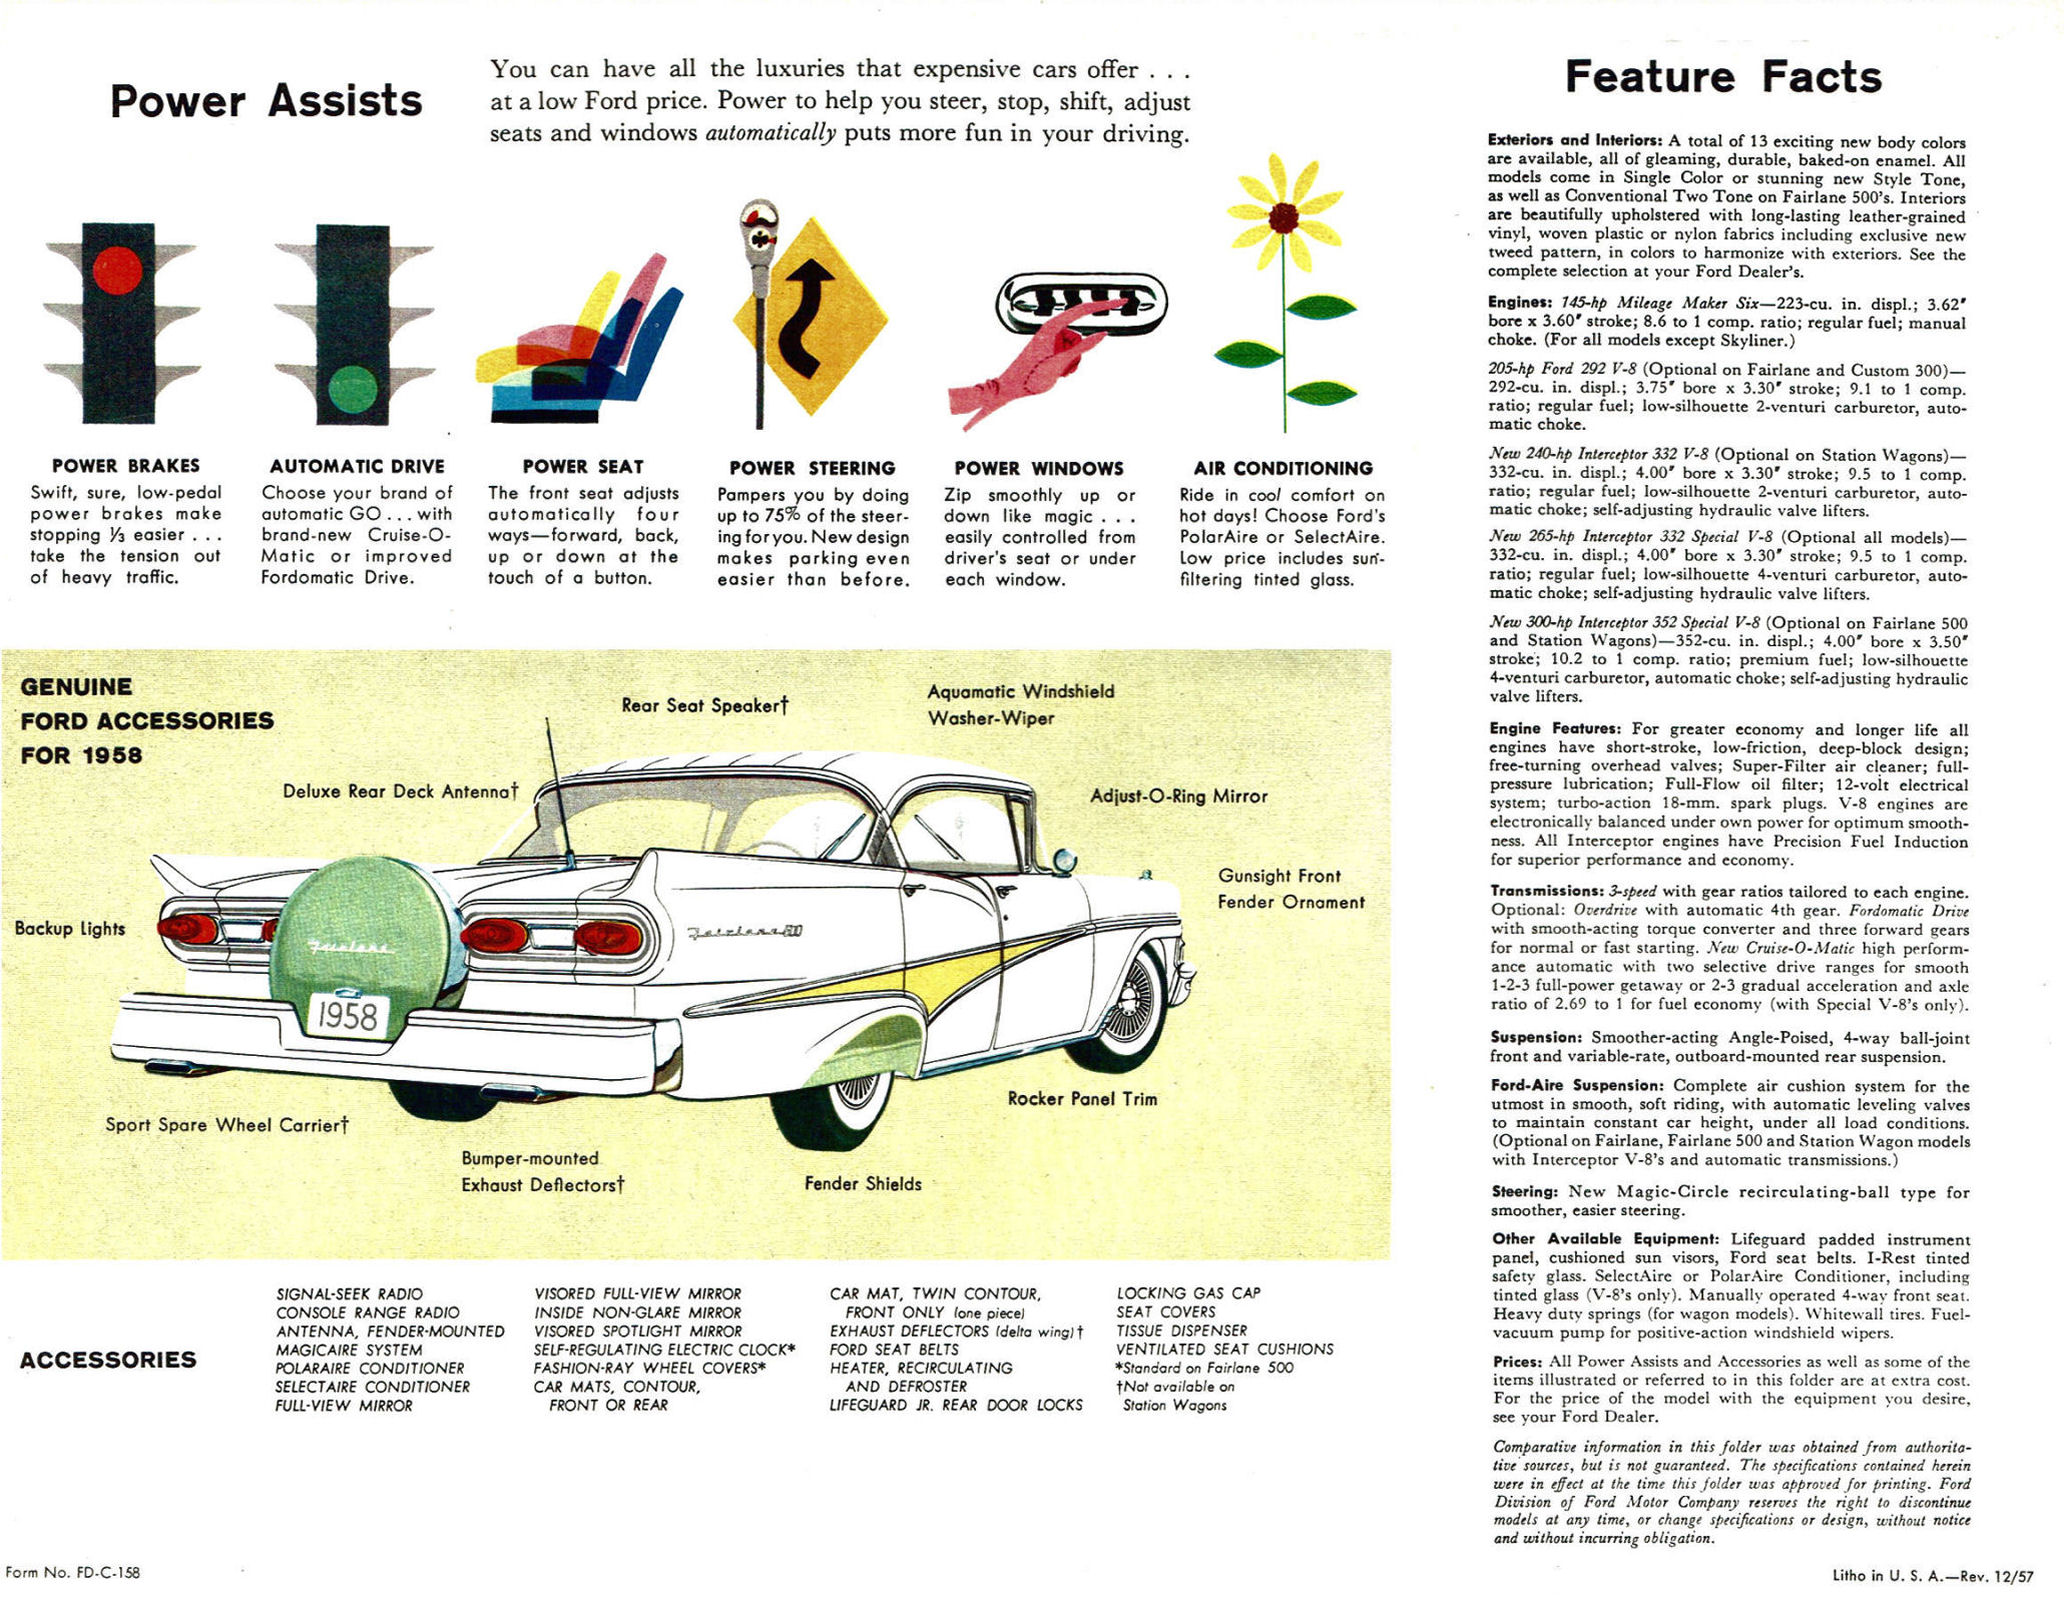 1958 Ford Full Line Foldout 12-57 (TP).pdf-2023-12-4 15.9.10_Page_3